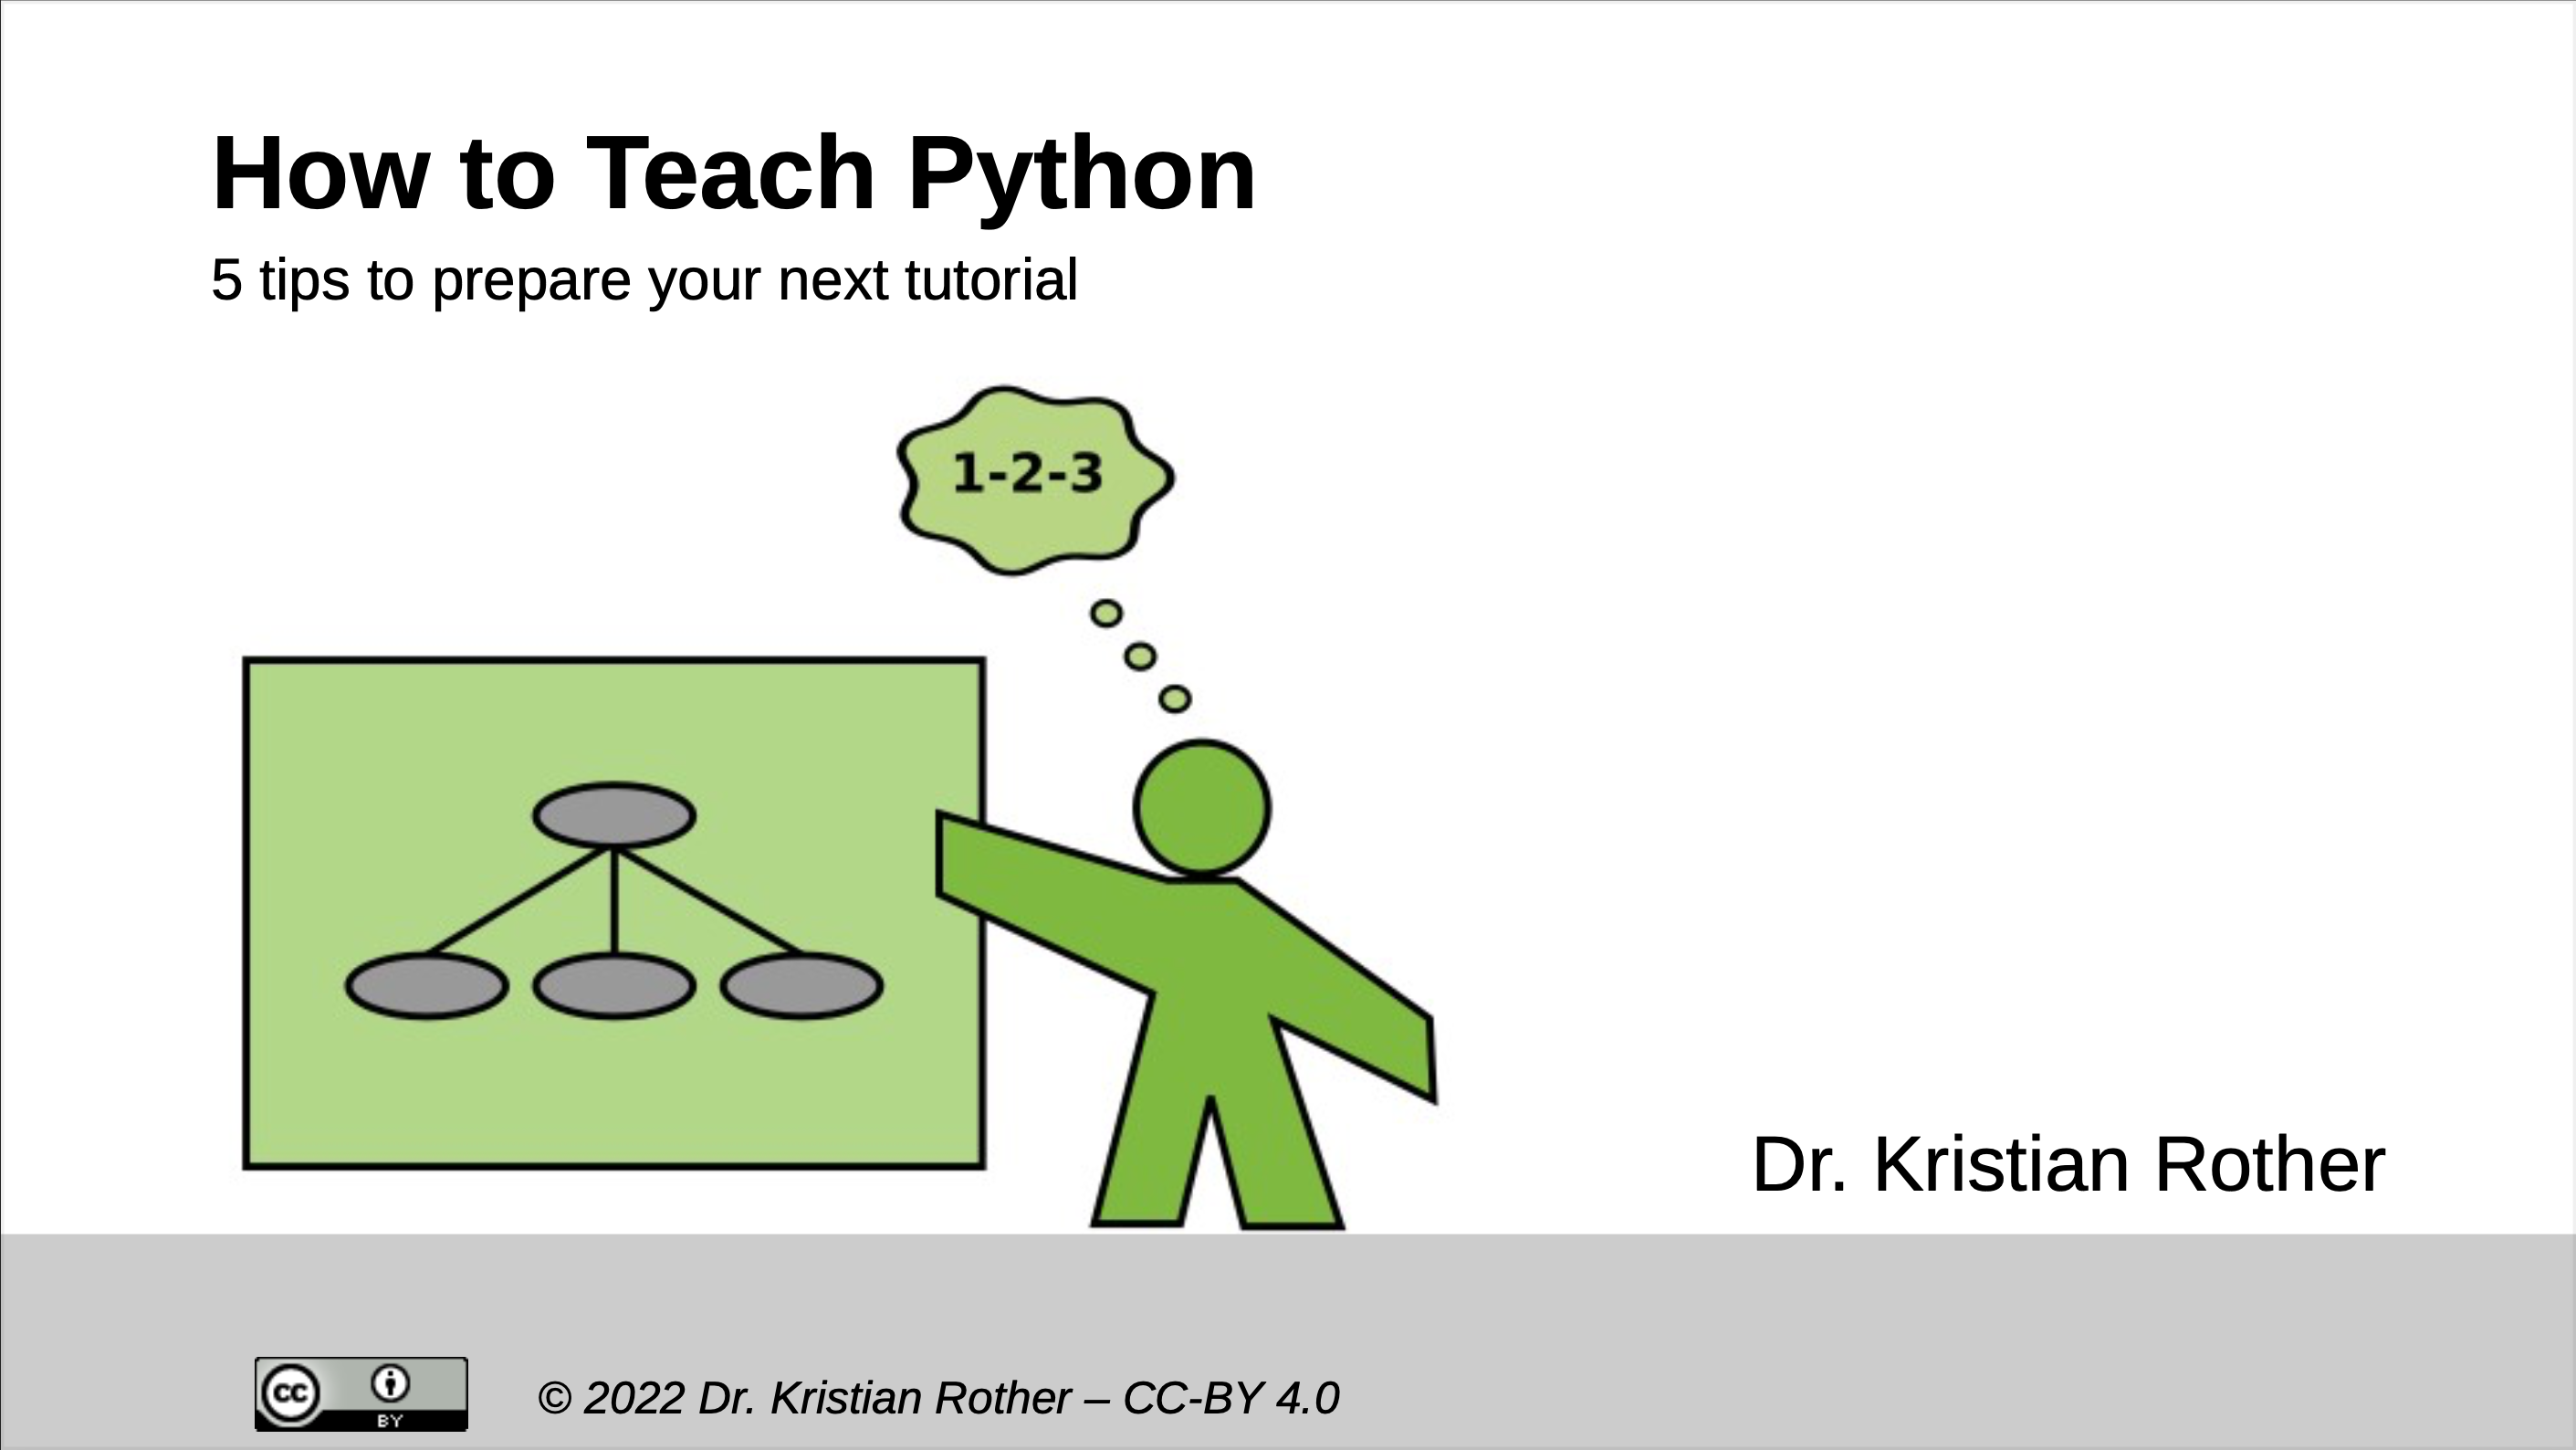 «How to teach Python» by Kristian Rother